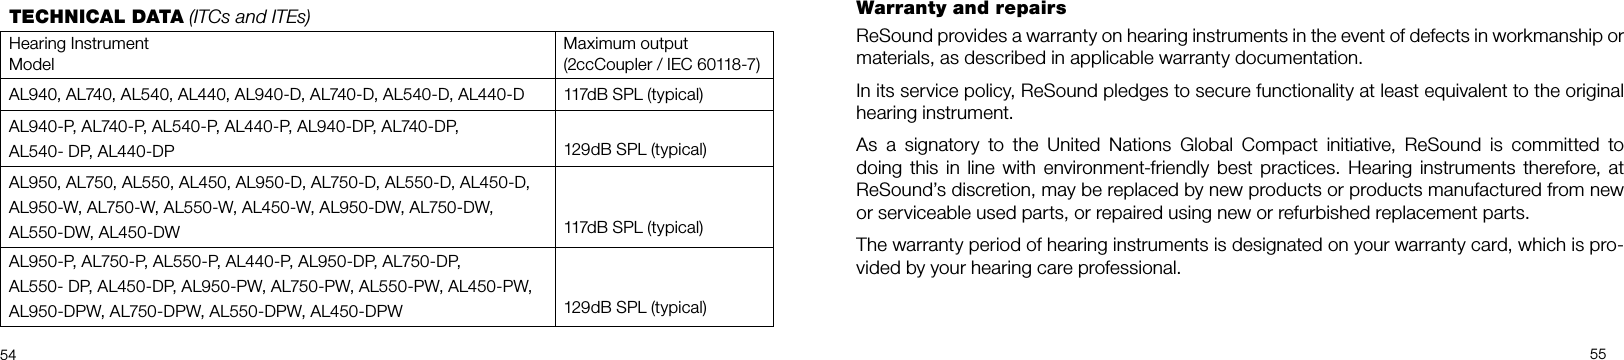 54 55Warranty and repairs ReSound provides a warranty on hearing instruments in the event of defects in workmanship or materials, as described in applicable warranty documentation.In its service policy, ReSound pledges to secure functionality at least equivalent to the original hearing instrument.As a signatory to the United Nations Global Compact initiative, ReSound is committed to  doing this in line with environment-friendly best practices. Hearing instruments therefore, at ReSound’s discretion, may be replaced by new products or products manufactured from new or serviceable used parts, or repaired using new or refurbished replacement parts.The warranty period of hearing instruments is designated on your warranty card, which is pro-vided by your hearing care professional.TECHNICAL DATA (ITCs and ITEs)Hearing Instrument ModelMaximum output (2ccCoupler / IEC 60118-7)AL940, AL740, AL540, AL440, AL940-D, AL740-D, AL540-D, AL440-D 117dB SPL (typical)AL940-P, AL740-P, AL540-P, AL440-P, AL940-DP, AL740-DP, AL540- DP, AL440-DP 129dB SPL (typical)AL950, AL750, AL550, AL450, AL950-D, AL750-D, AL550-D, AL450-D,AL950-W, AL750-W, AL550-W, AL450-W, AL950-DW, AL750-DW, AL550-DW, AL450-DW 117dB SPL (typical) AL950-P, AL750-P, AL550-P, AL440-P, AL950-DP, AL750-DP, AL550- DP, AL450-DP, AL950-PW, AL750-PW, AL550-PW, AL450-PW, AL950-DPW, AL750-DPW, AL550-DPW, AL450-DPW 129dB SPL (typical)